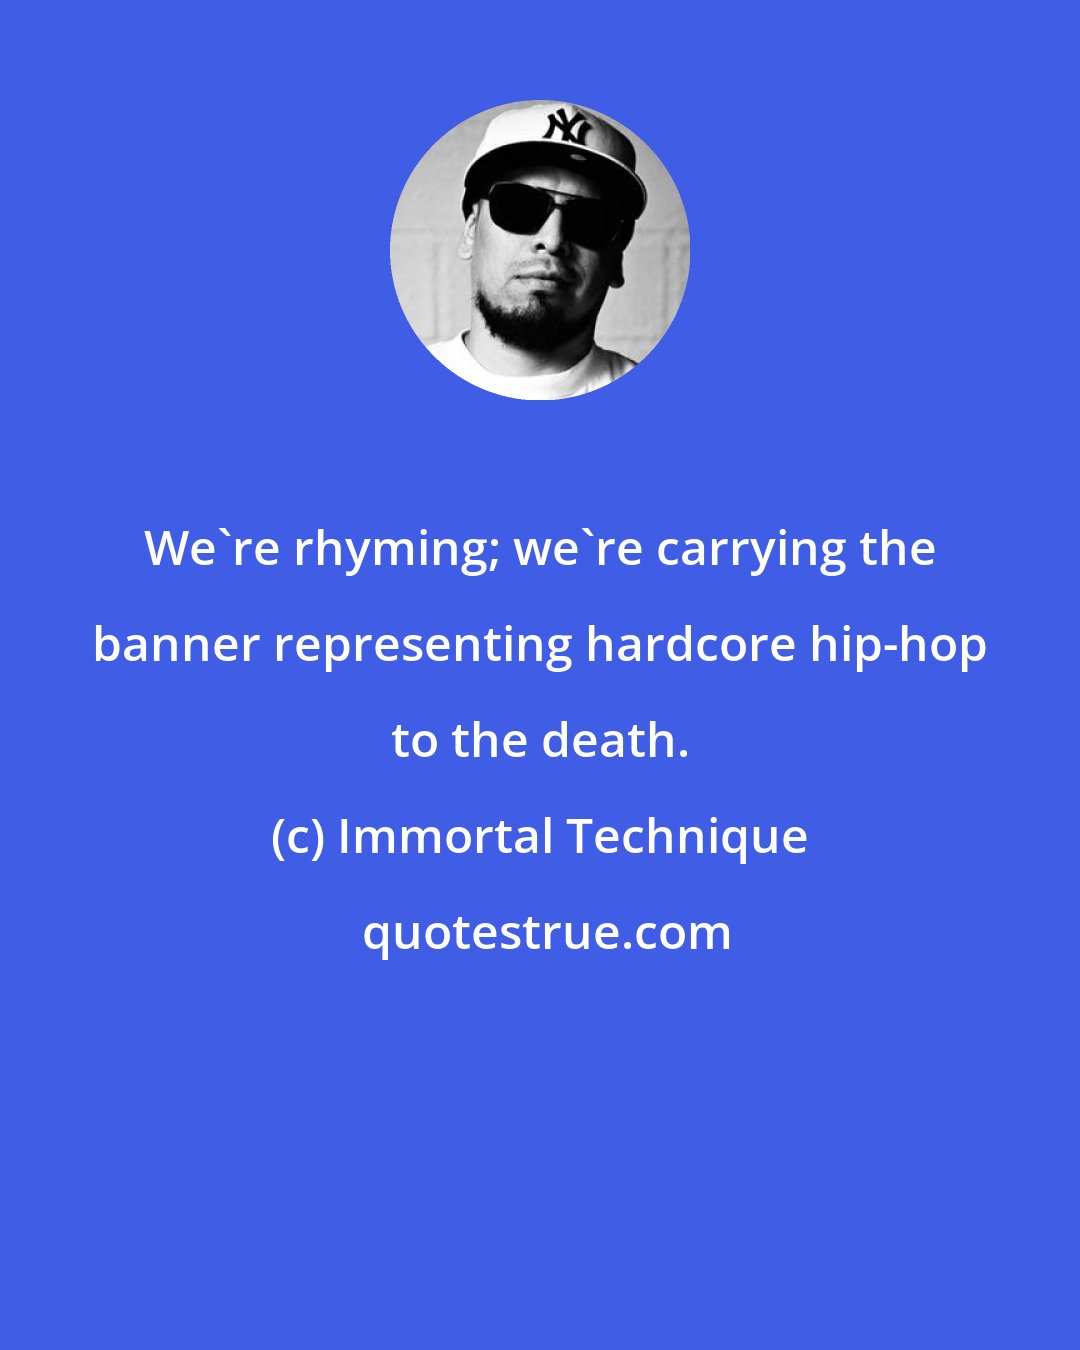 Immortal Technique: We're rhyming; we're carrying the banner representing hardcore hip-hop to the death.